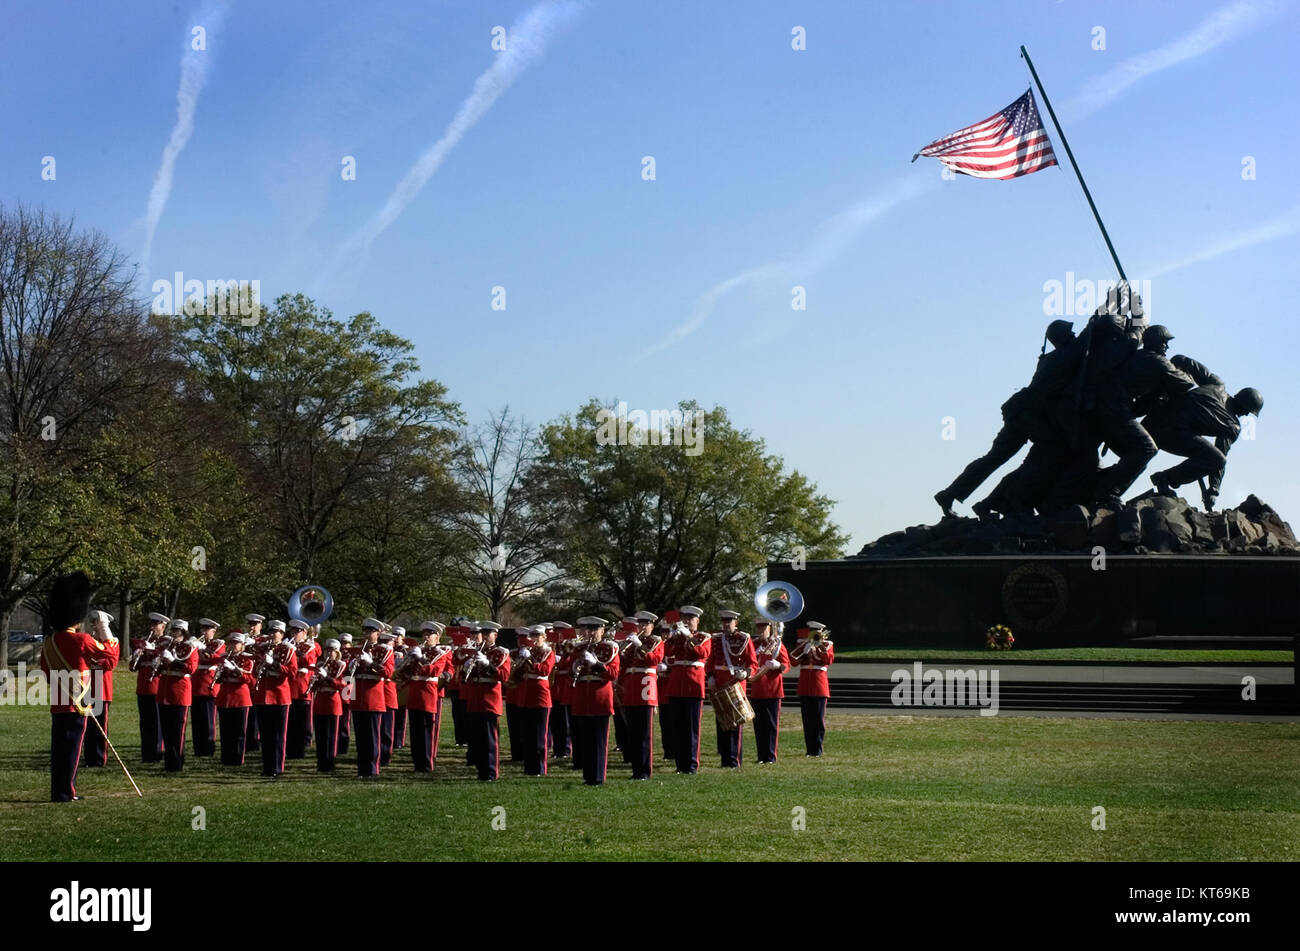 US Navy 041110-N-1810F-161 The U.S. Marine Corps marching band plays for an audience attending a wreath laying ceremony honoring the U.S. Marine Corps' 229th birthday at the Iwo Jima National Memorial Stock Photo